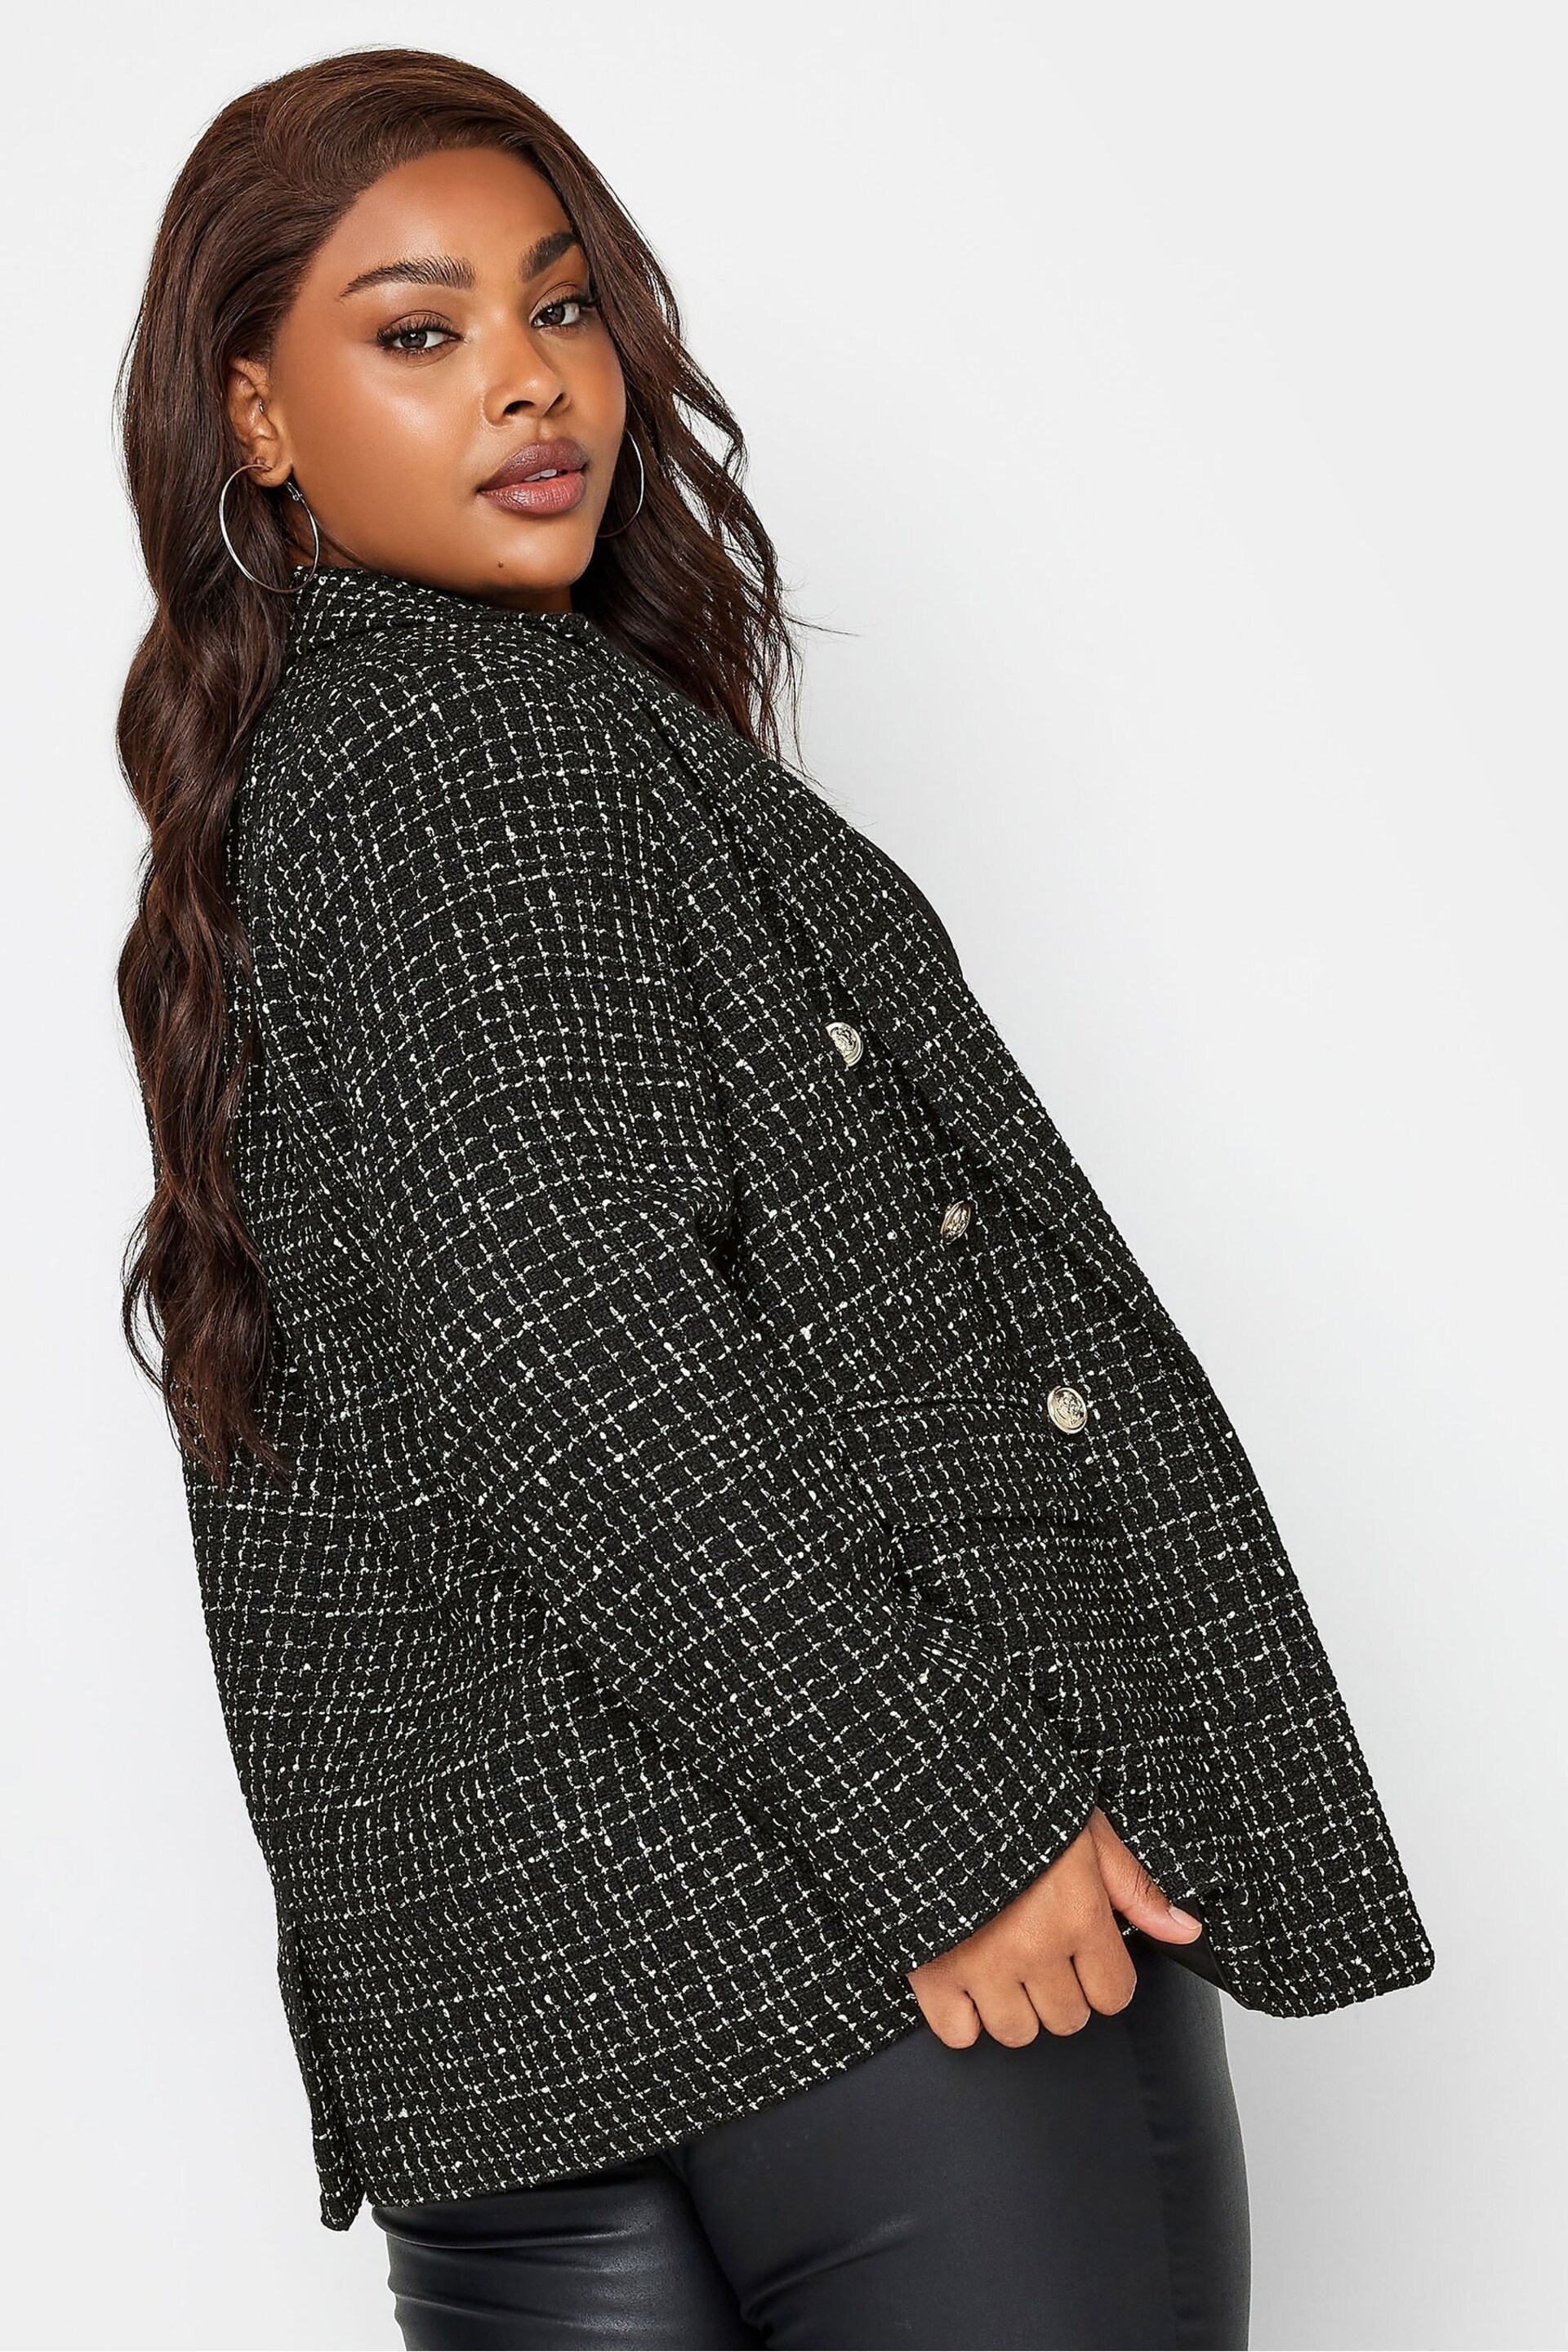 Yours Curve Black Boucle Blazer - Image 3 of 4